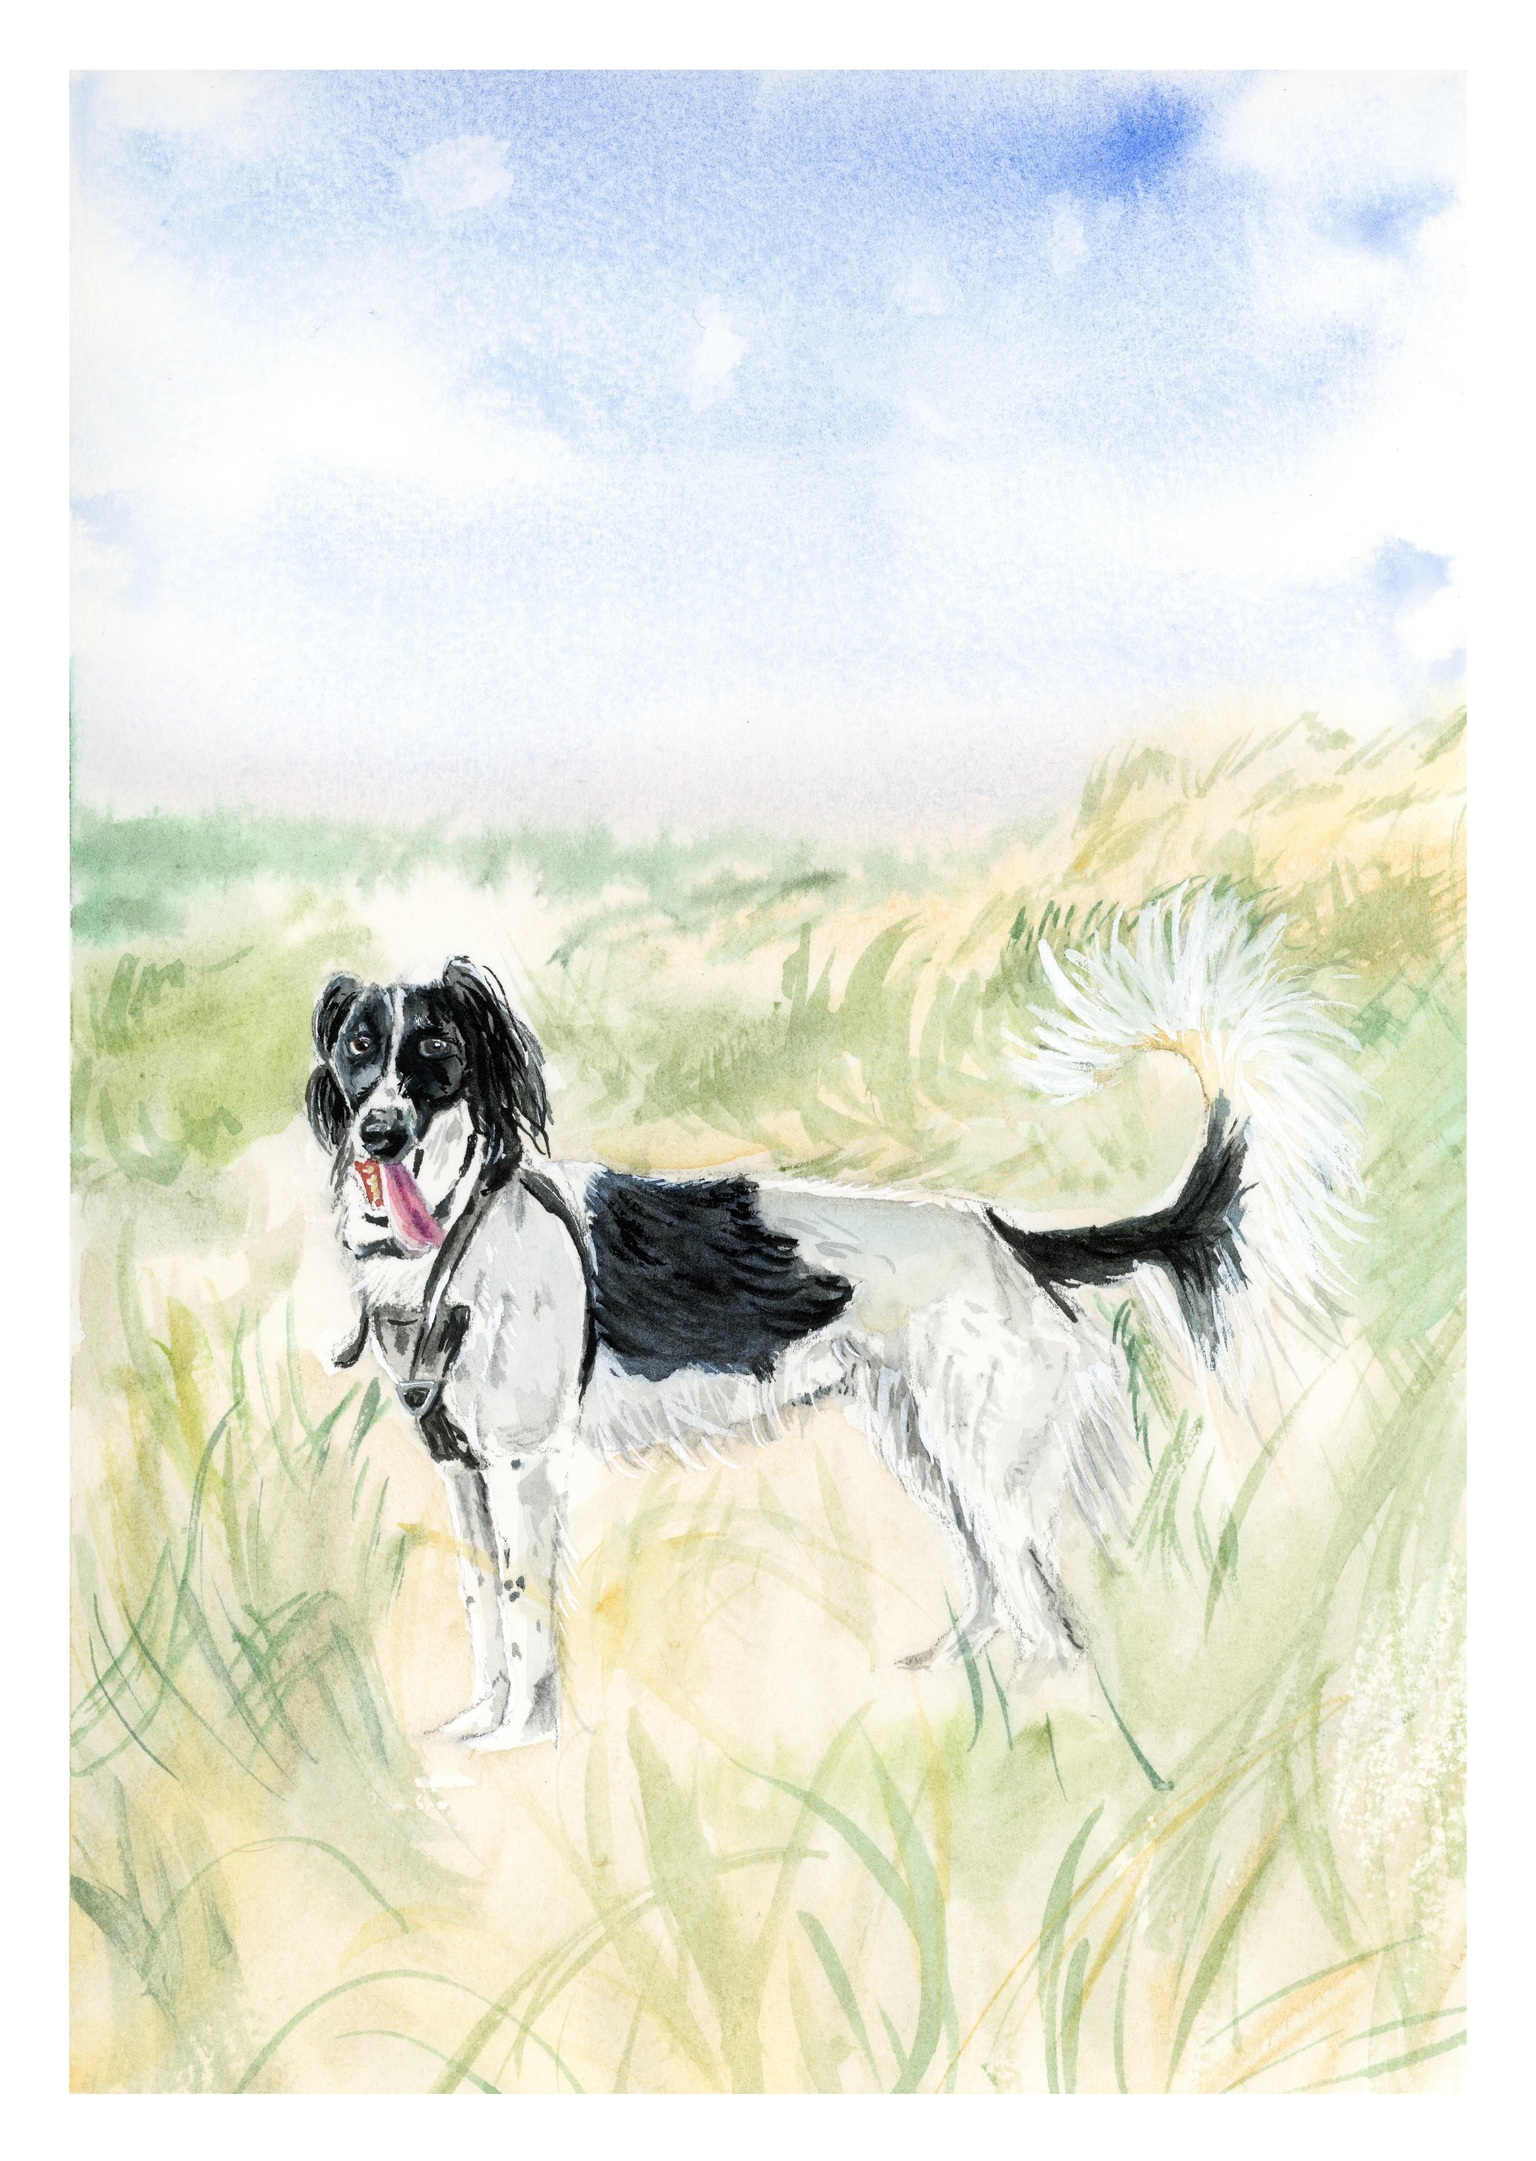 Watercolour of a black and white long haired dog on a grassy sand dune